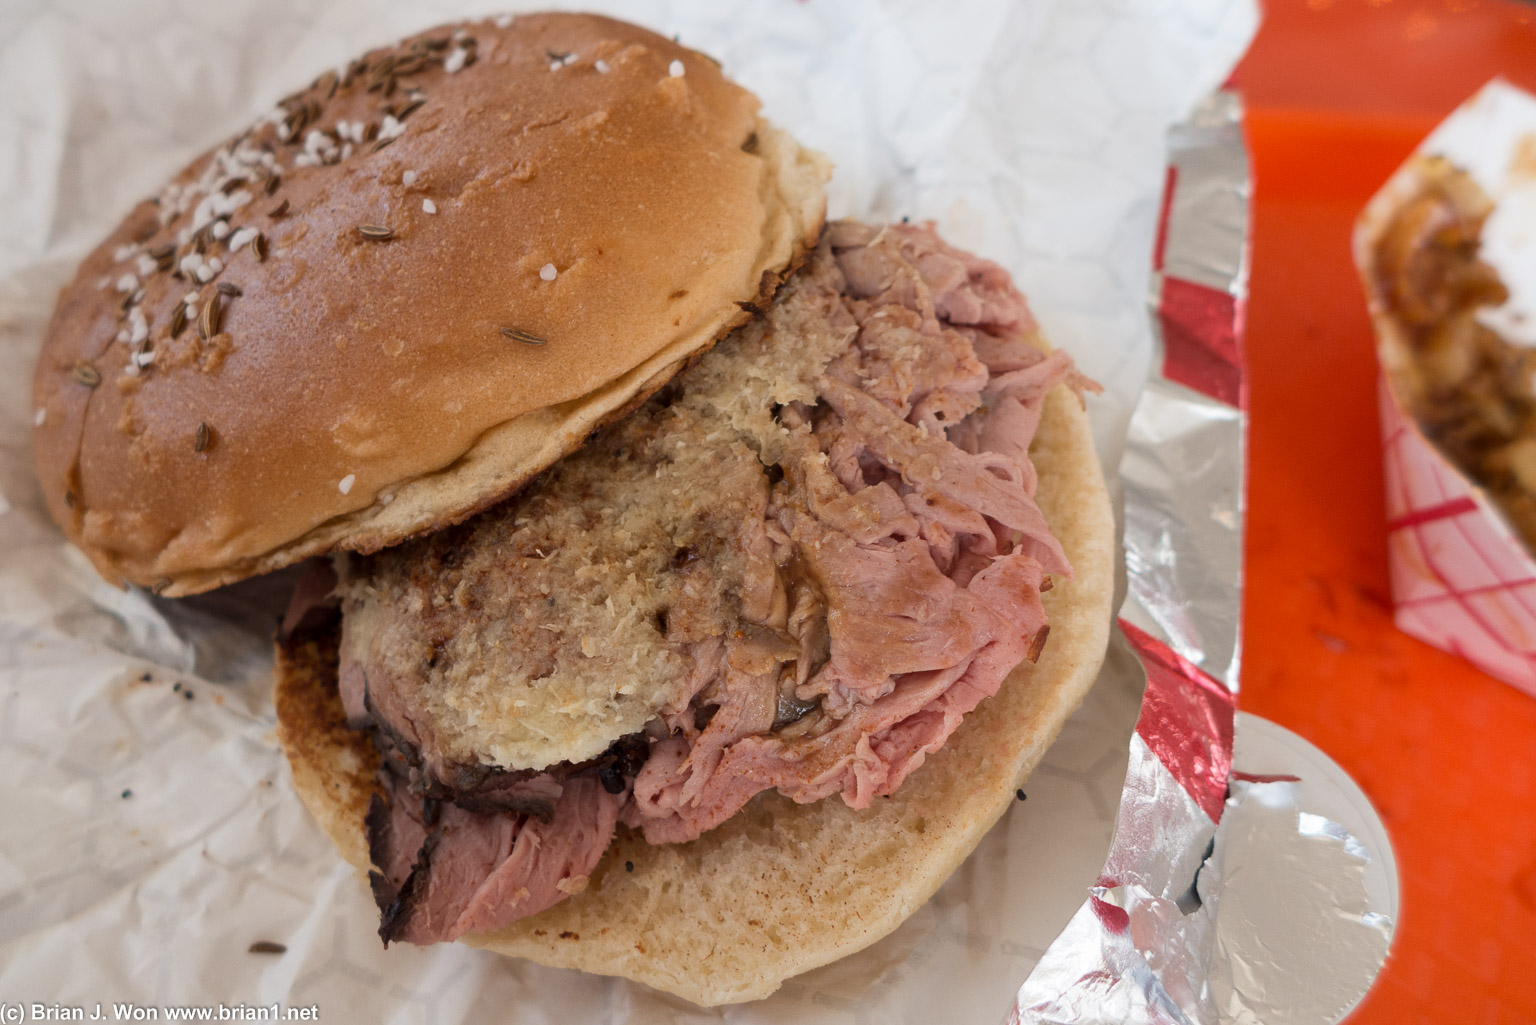 Beef on weck. This is a double beef?